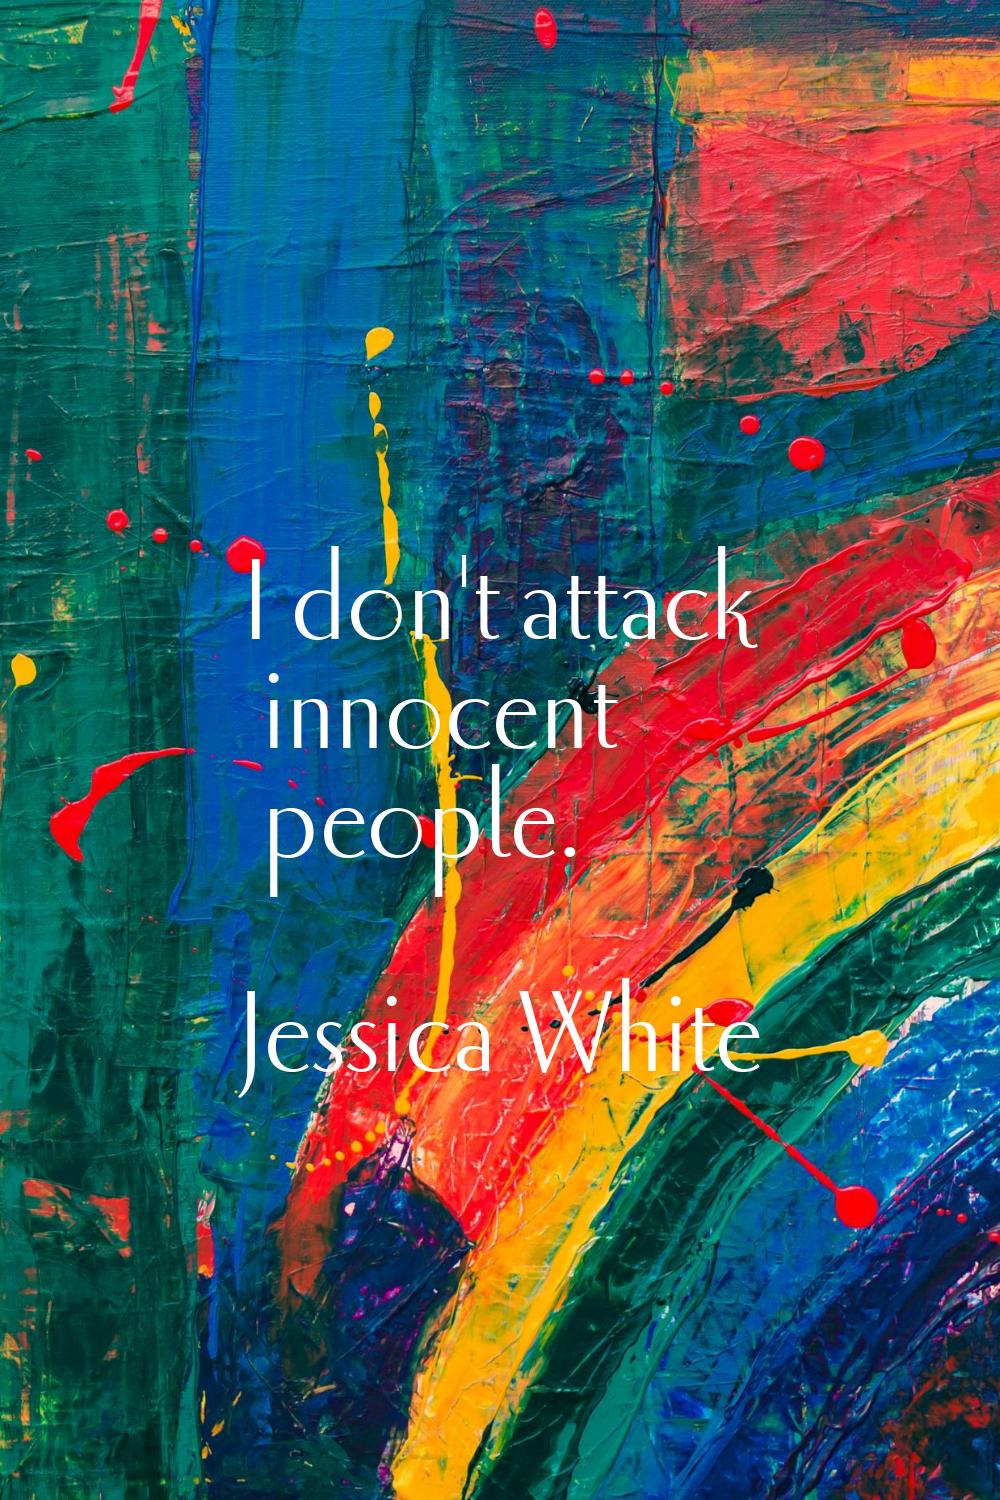 I don't attack innocent people.